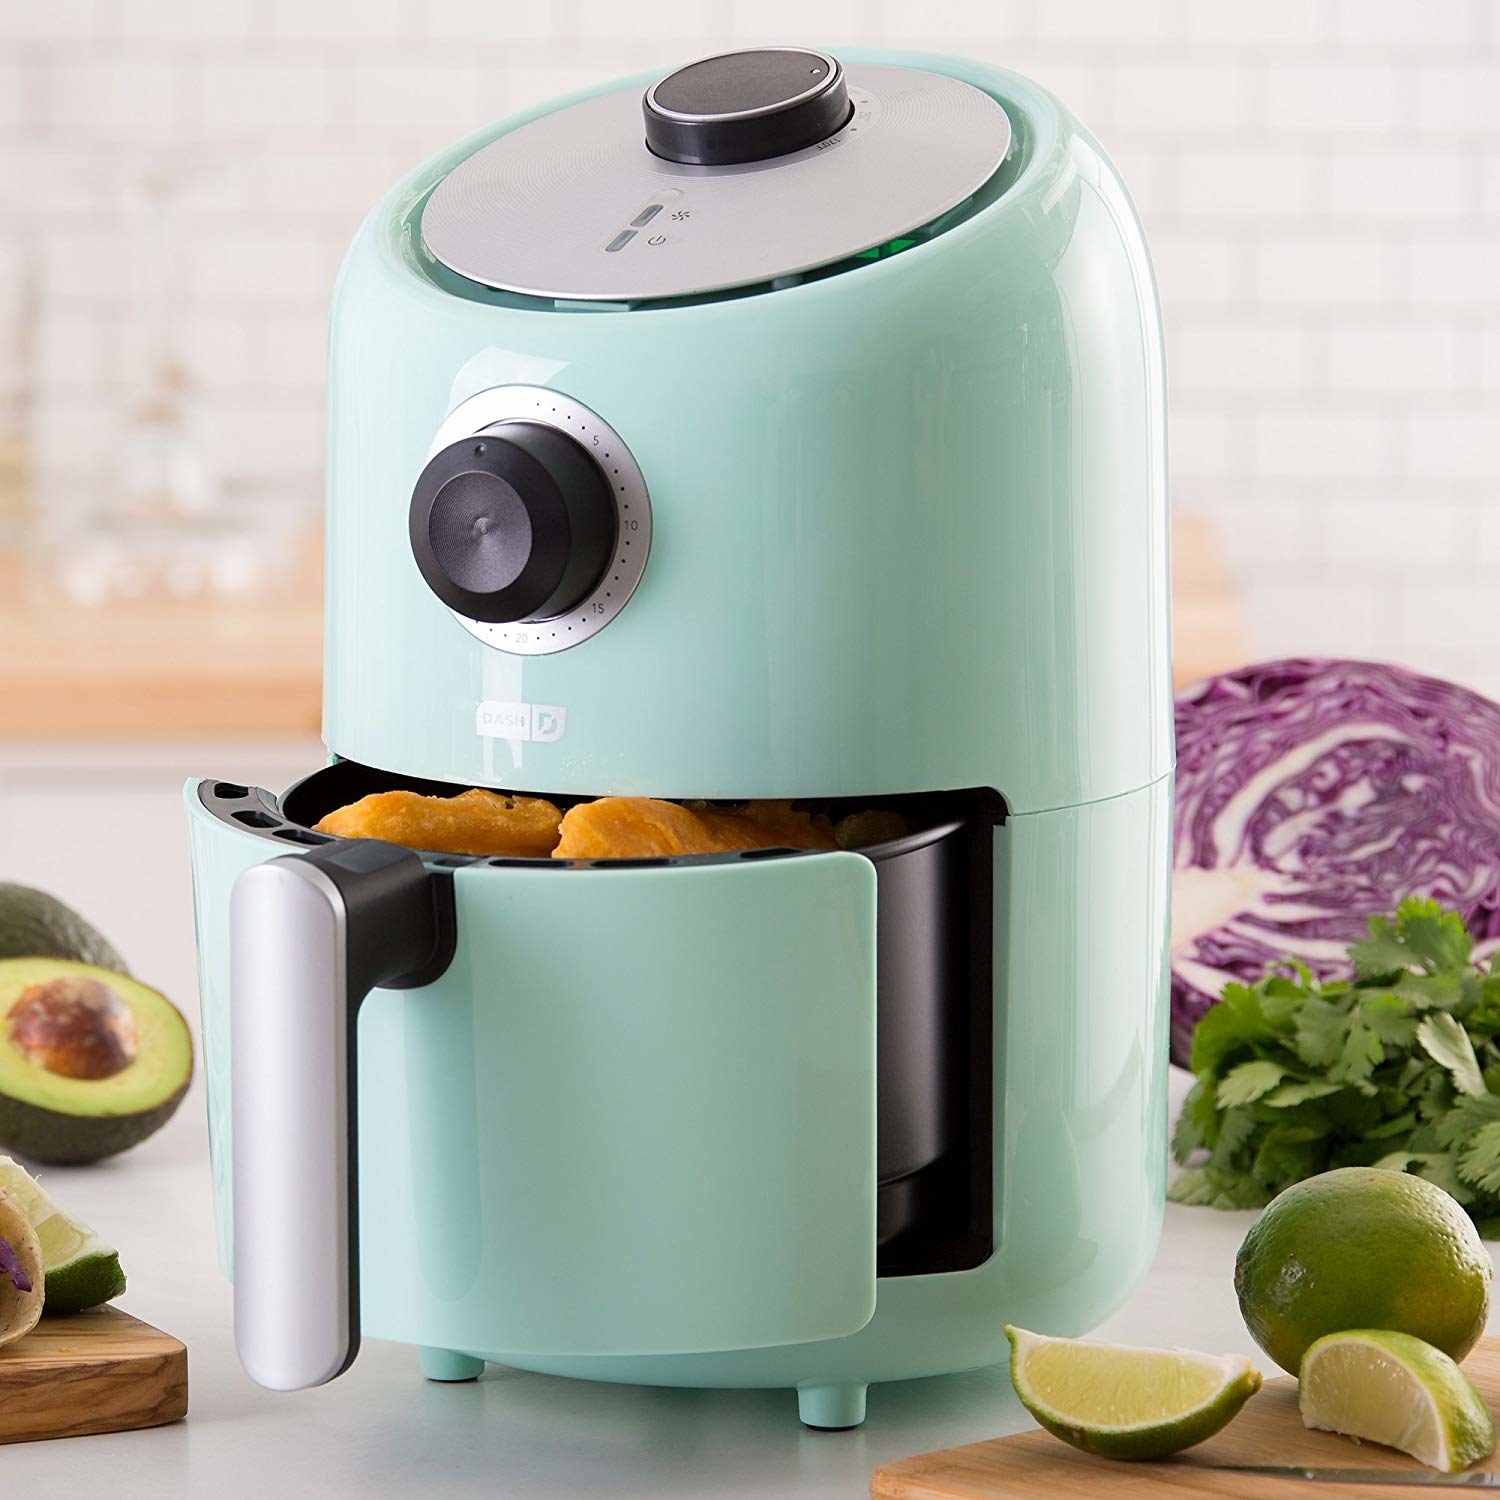 the cylindrical air fryer in light blue, with a knob dial and a front pull-out baket